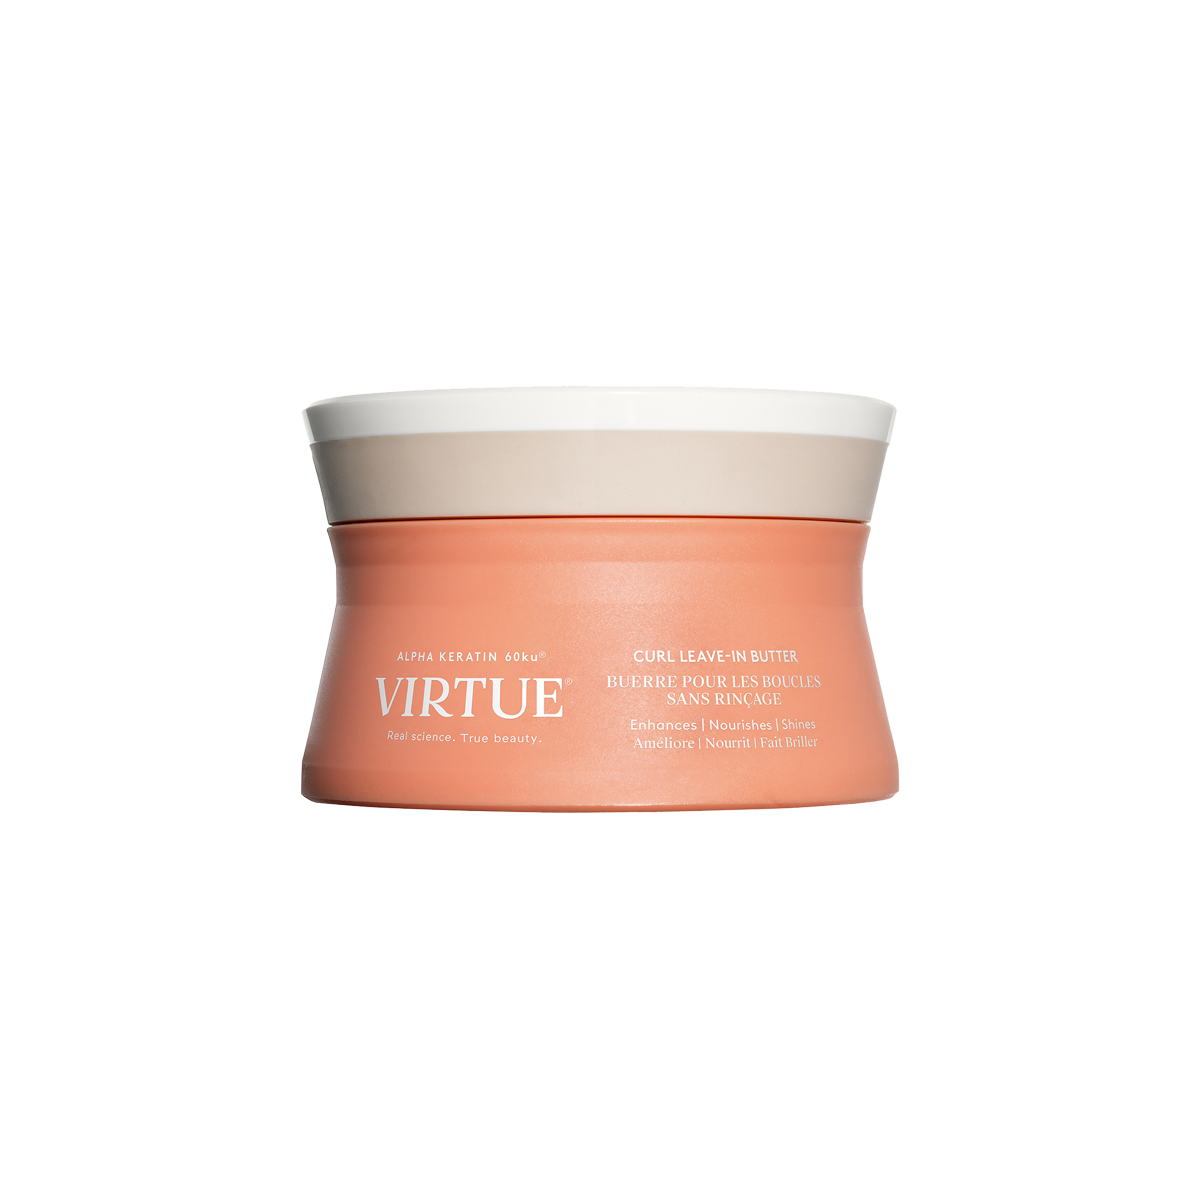 Virtue - Curl Leave-In Butter